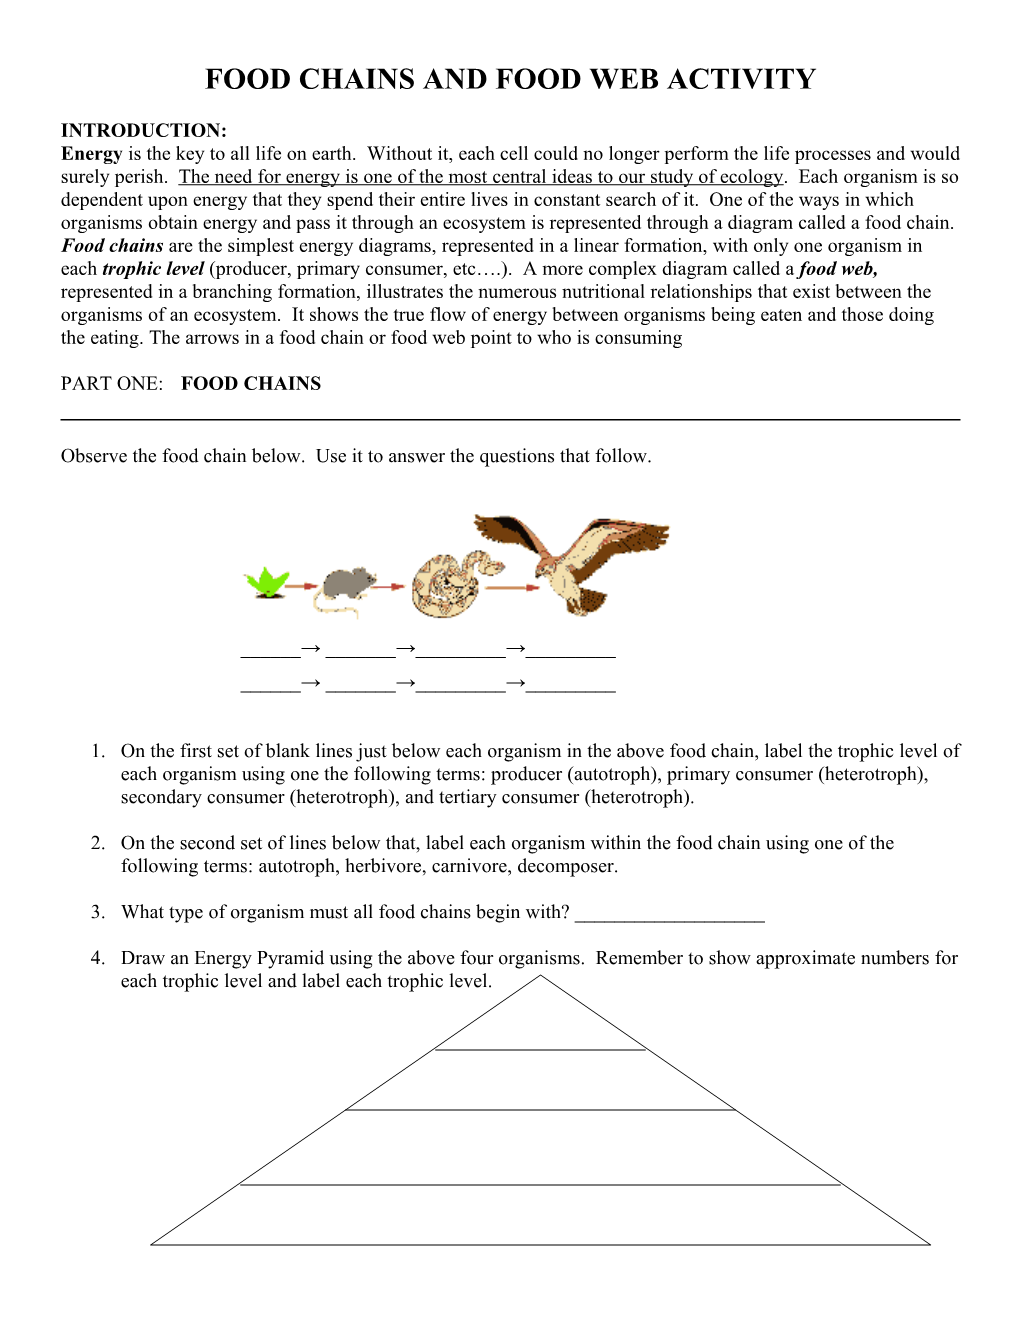 Food Chains and Food Web Activity